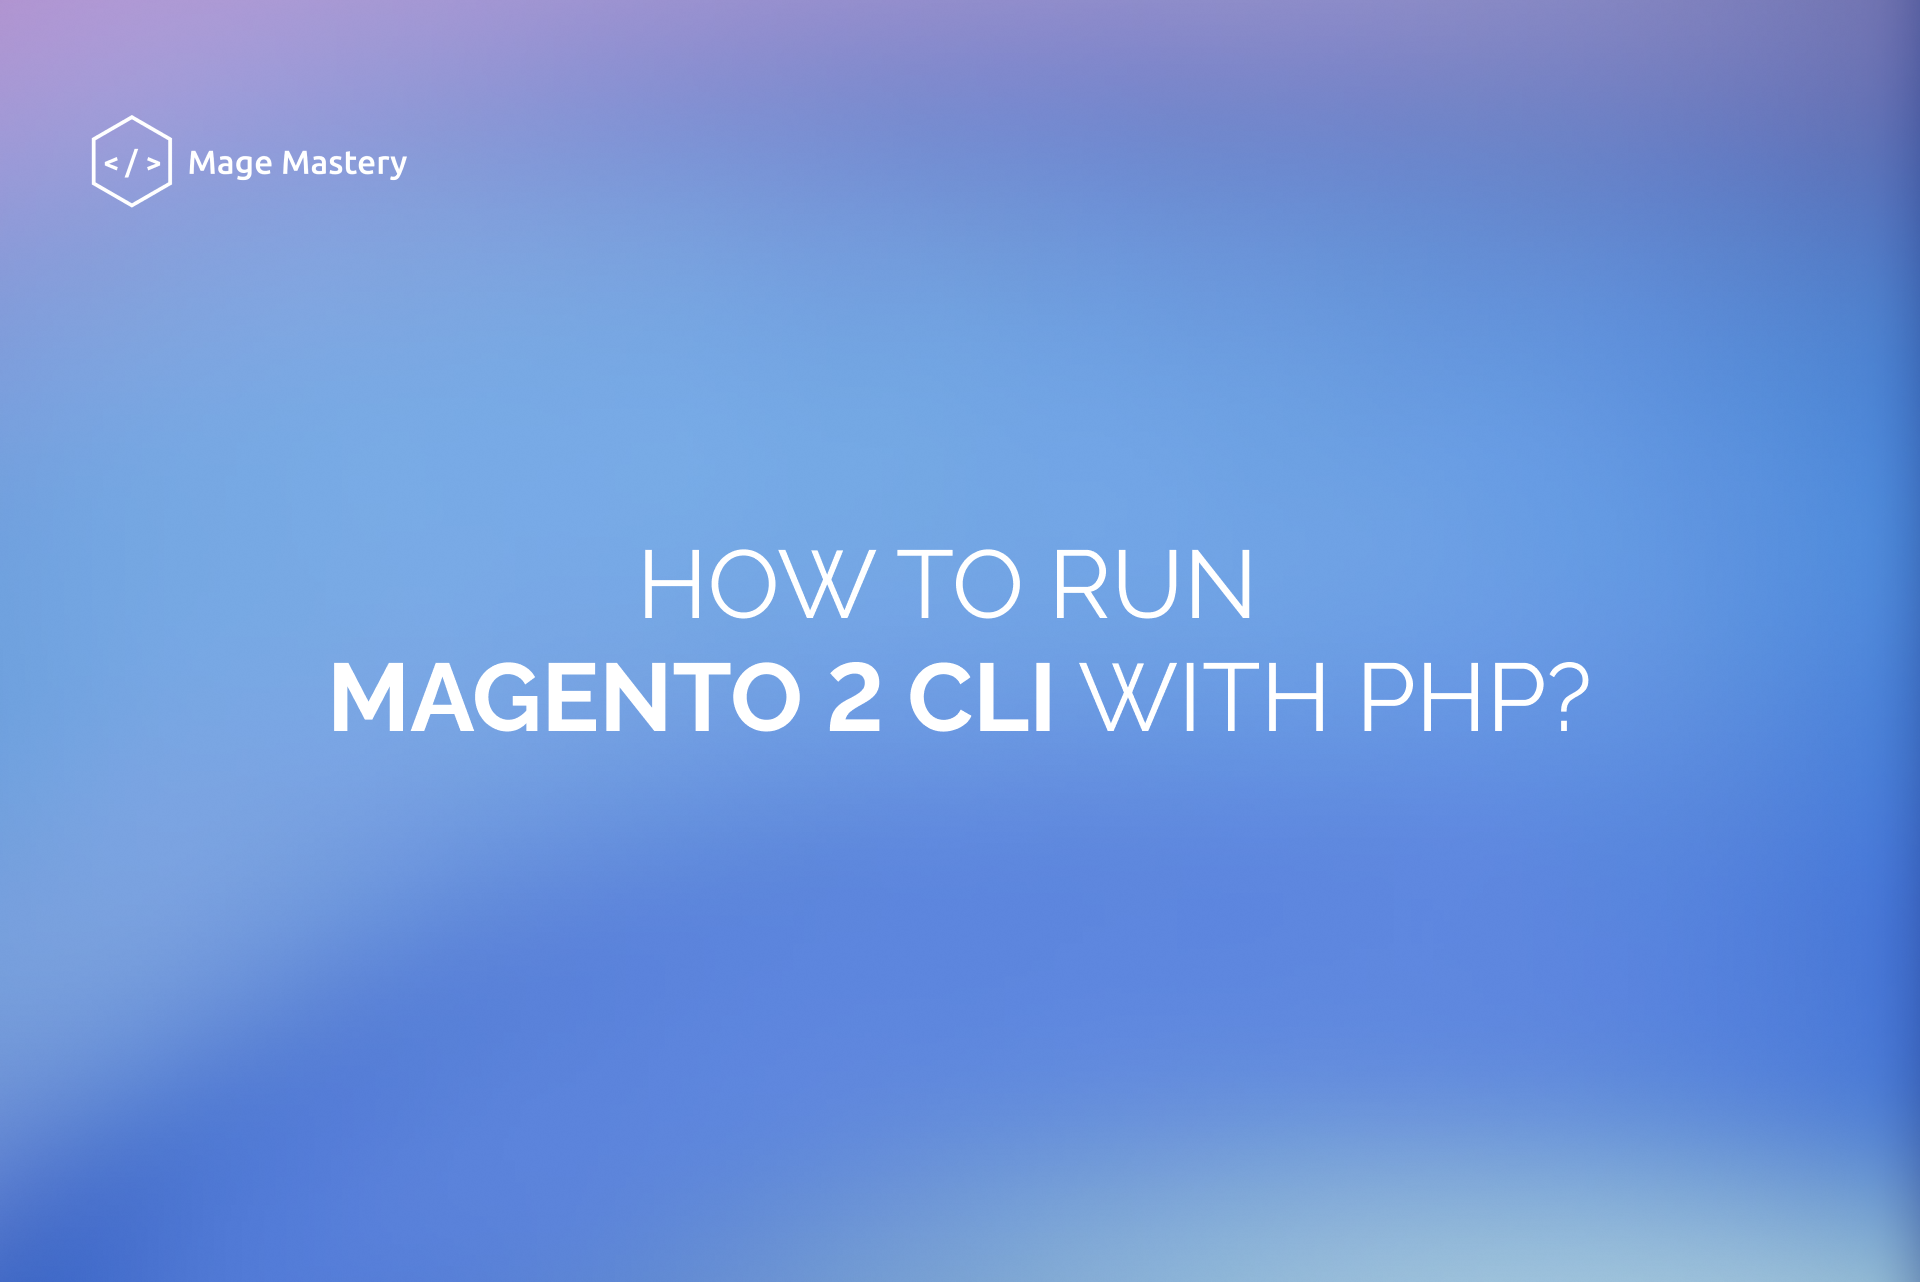 Run Magento 2 CLI with PHP